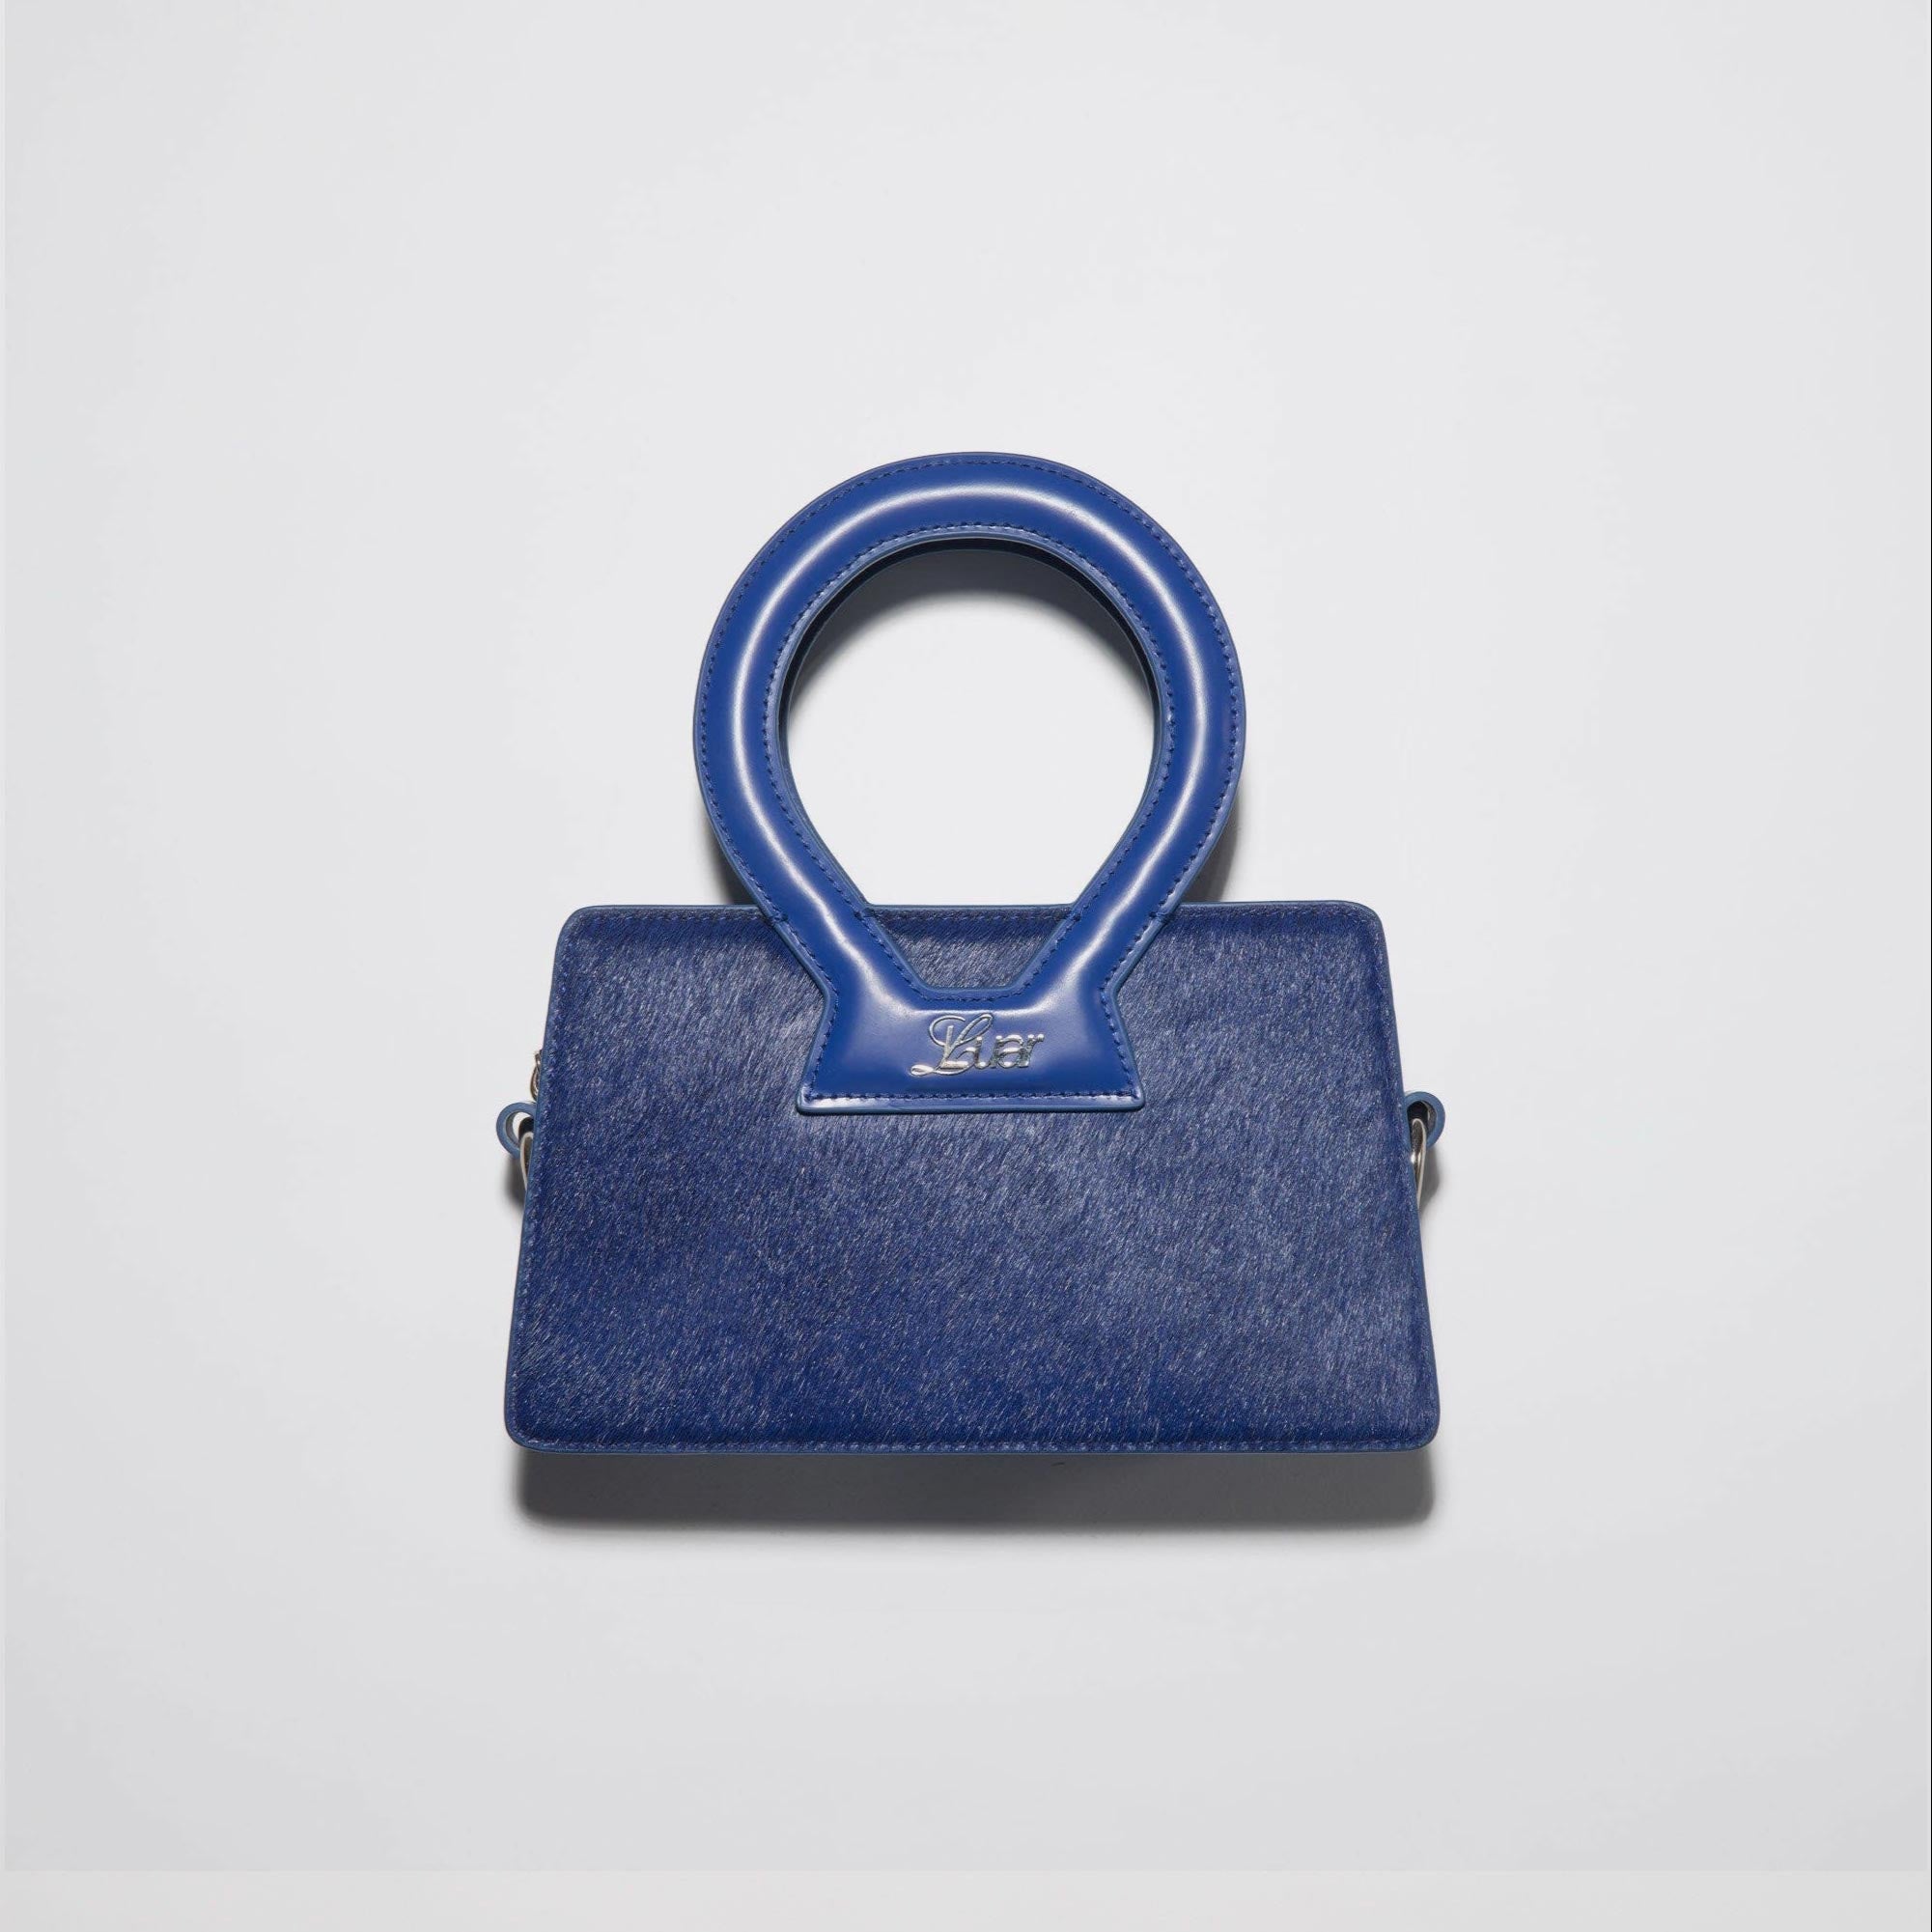 Front photo of Luar's Small Ana Bag, finished in a vibrant deep blue ponyhair, featuring a large circular top handle.